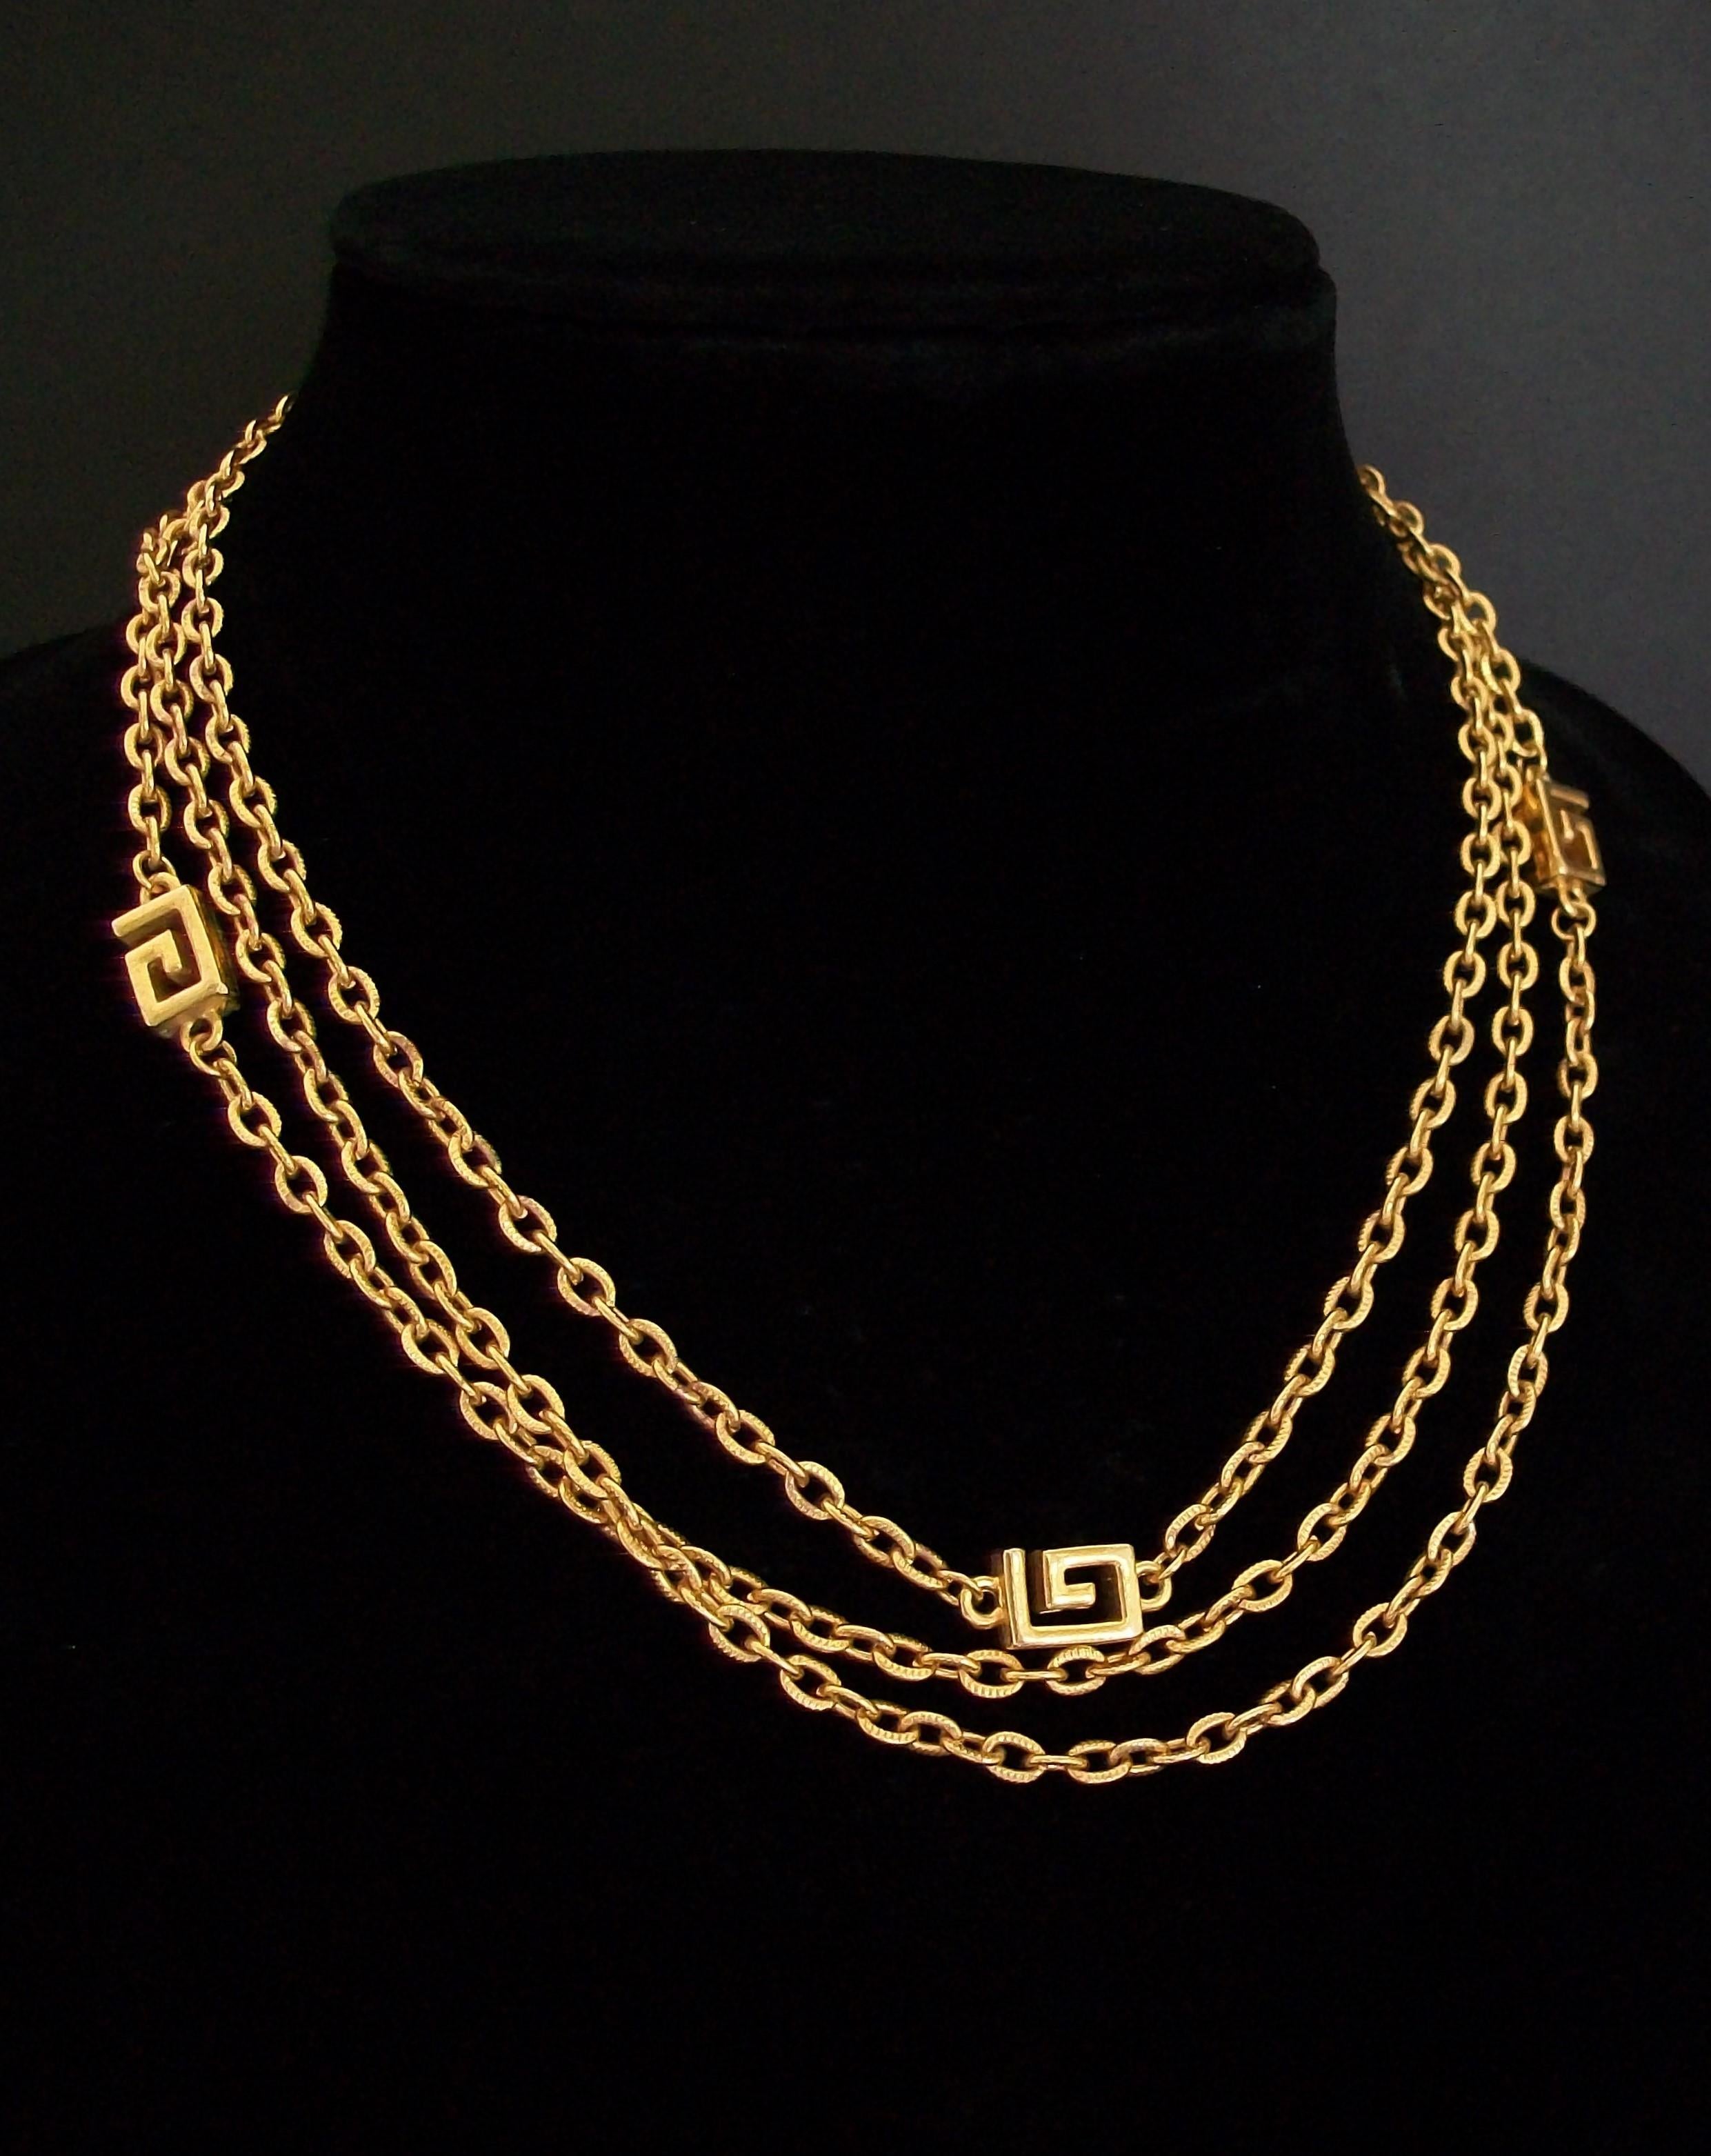 GIVENCHY - Vintage yellow gold tone 4G's sautoir chain necklace - rare quality piece - textured oval links - 4 'G' spacers (Givenchy logo) set at equal intervals - intended to be worn as a single or double strand (triple strand photos are for